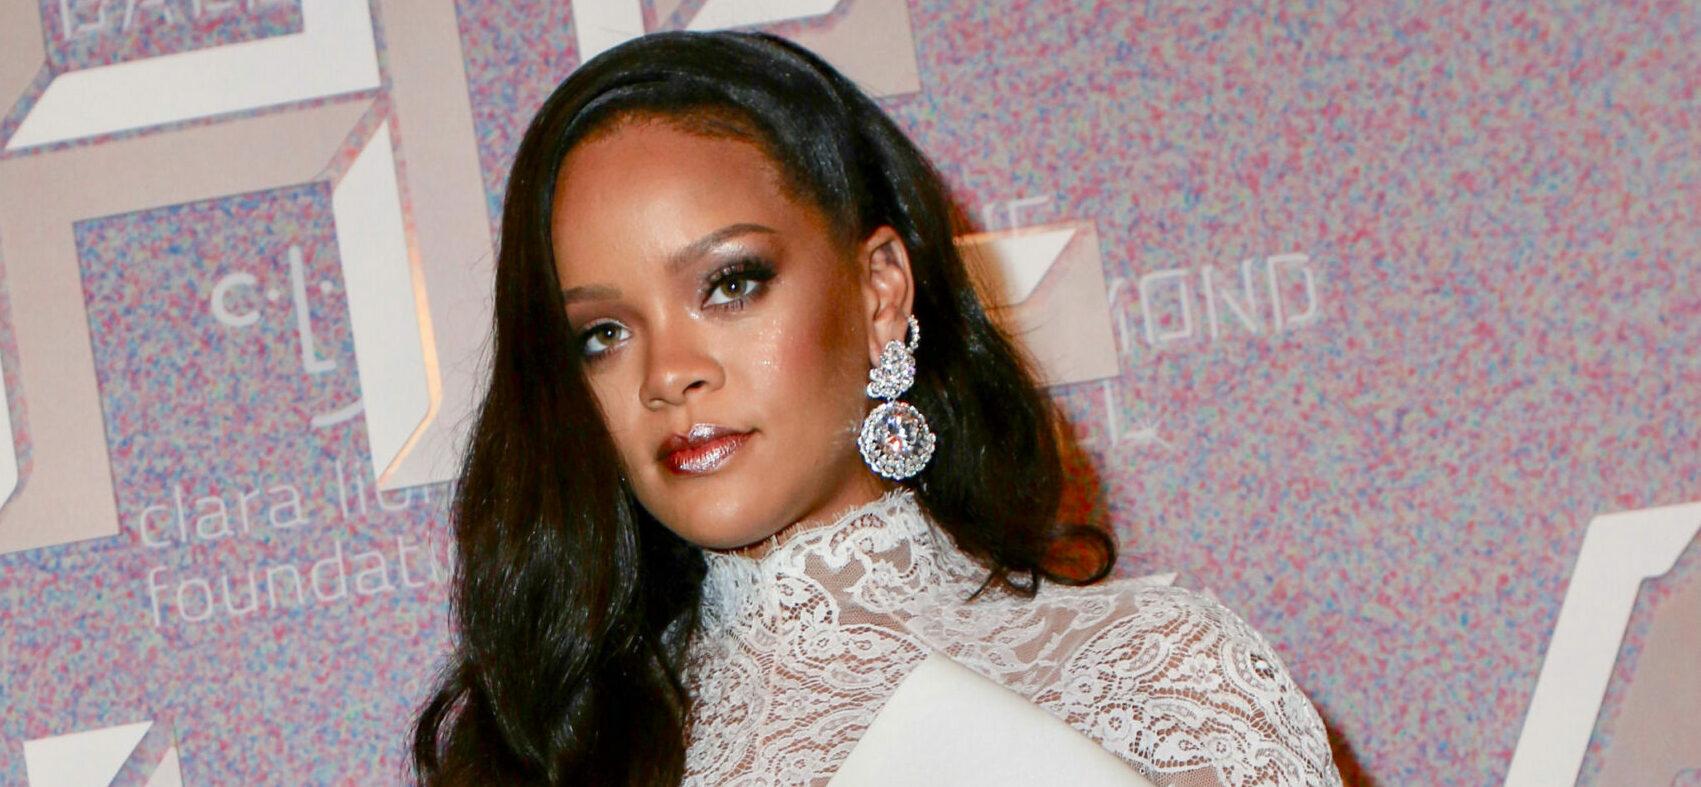 Rihanna Wears Sparkly See-Through Dress To Promote Her Savage X Fenty Show